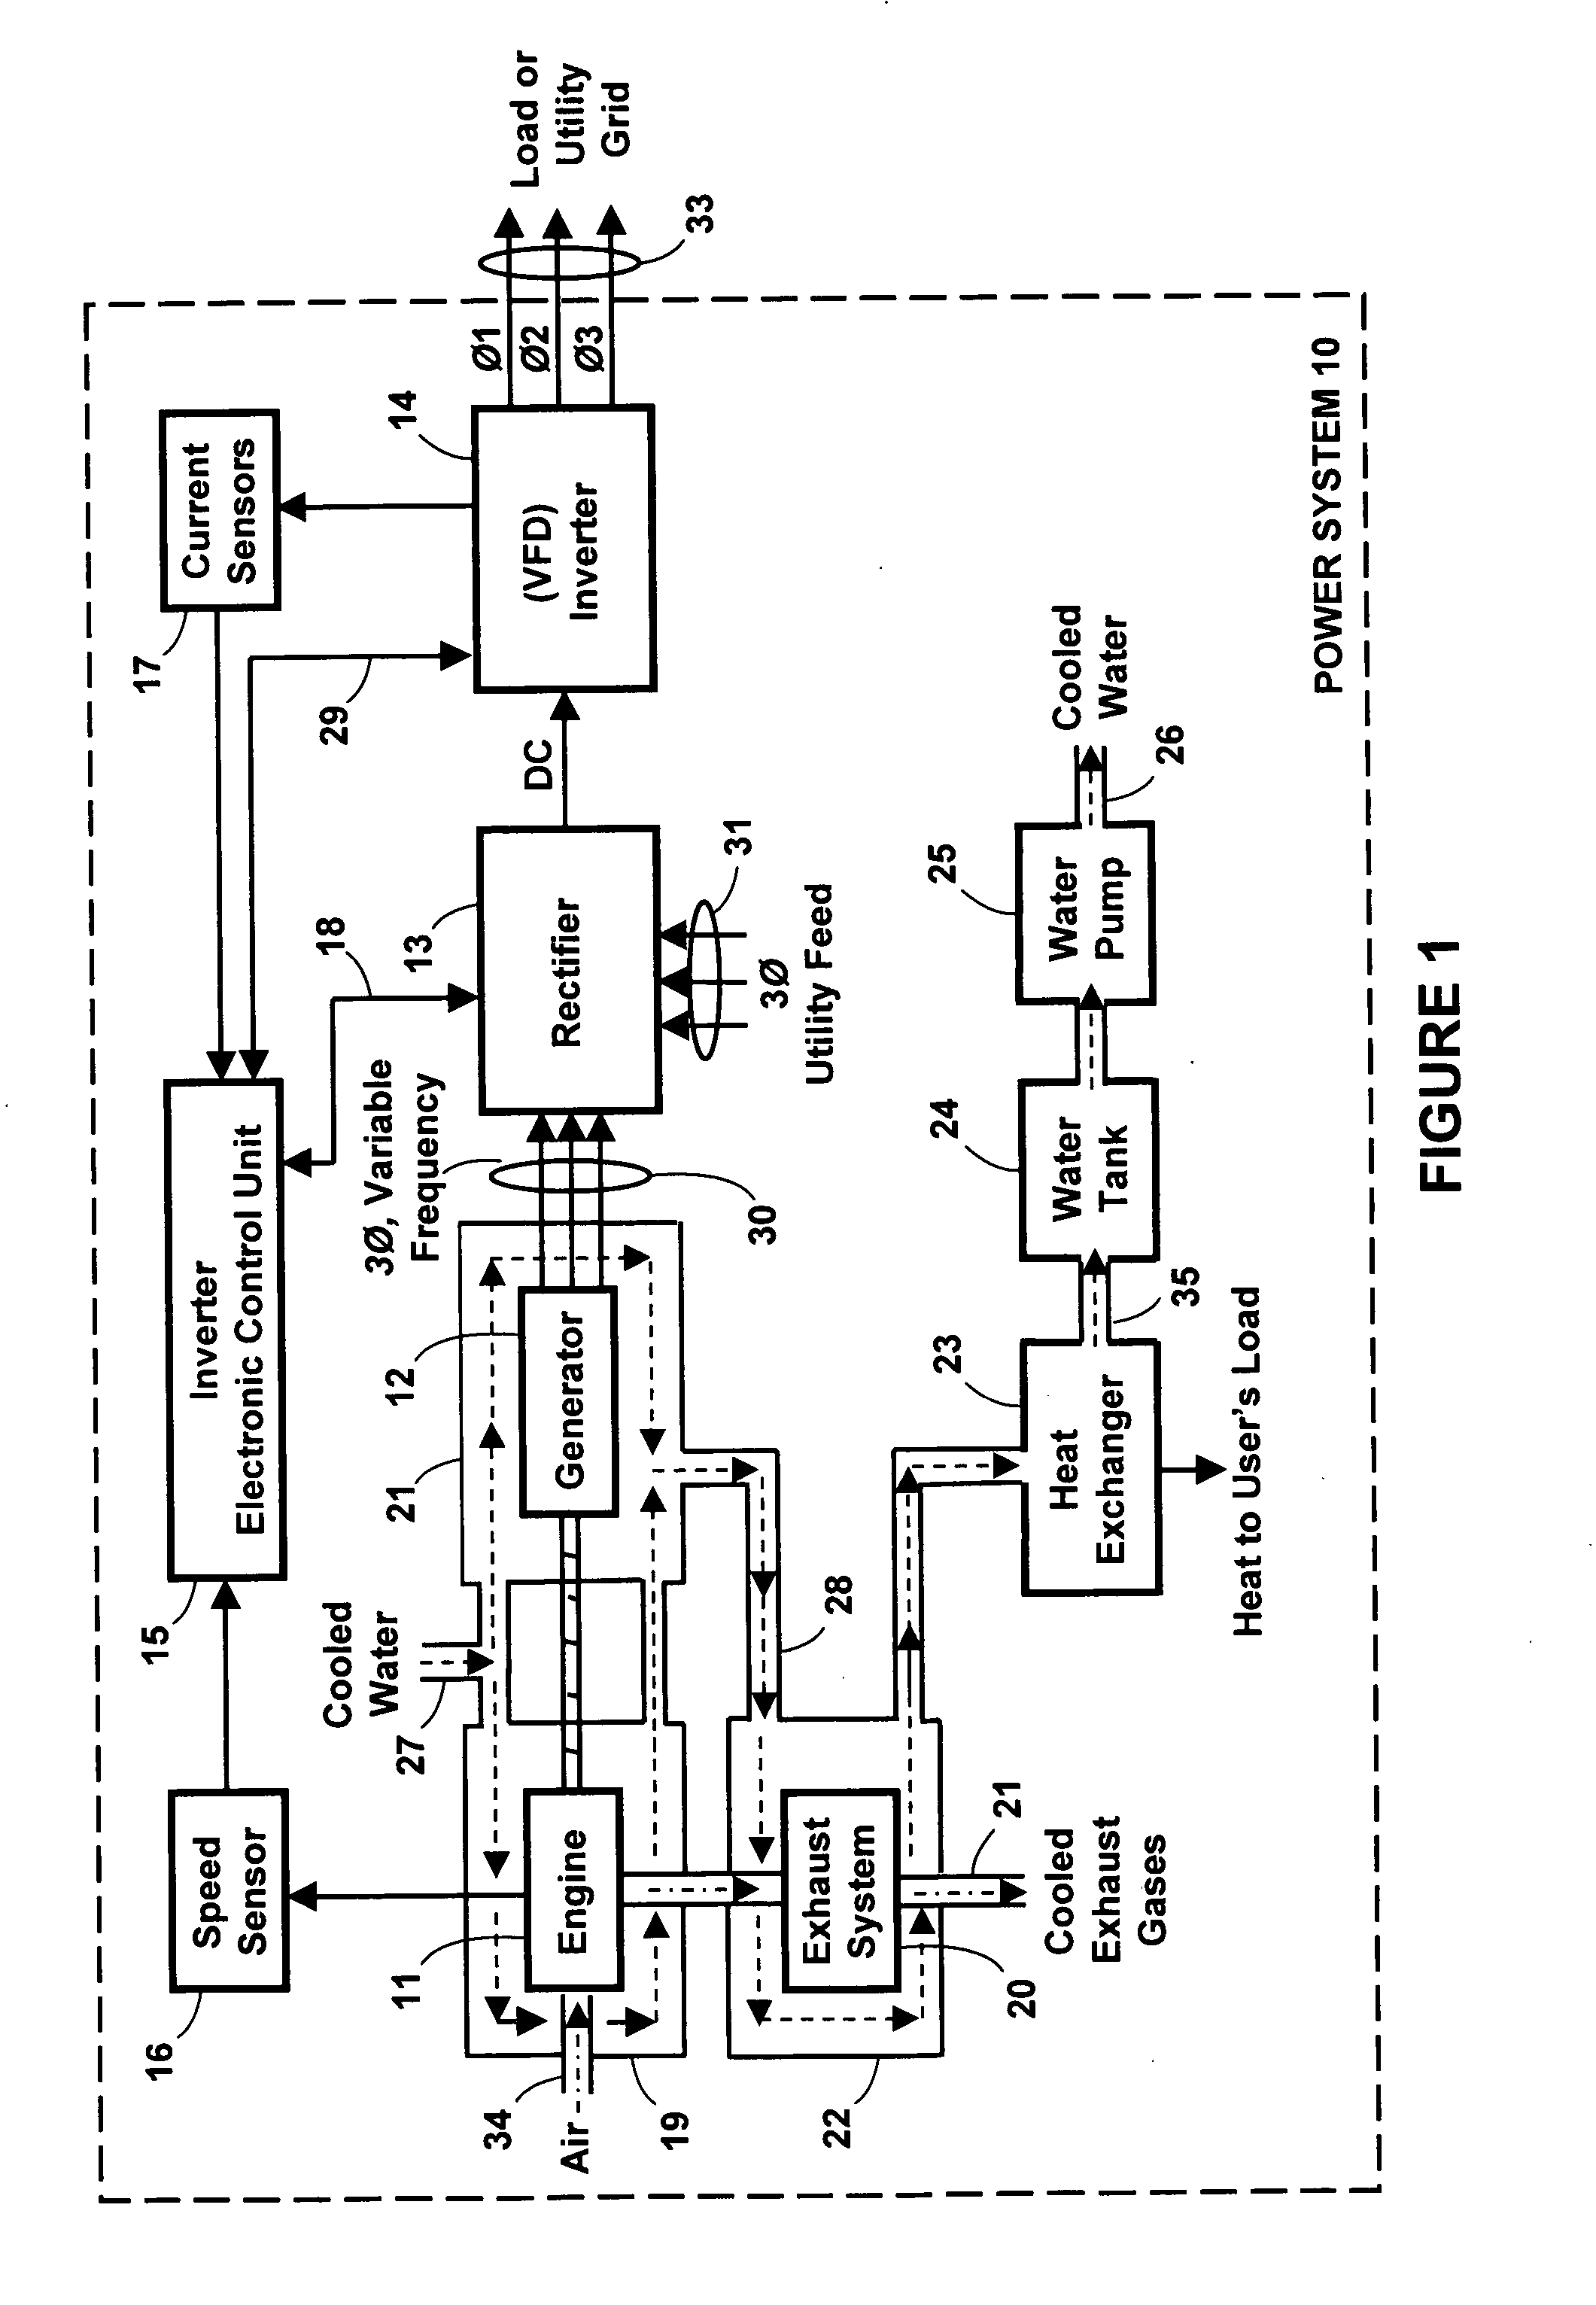 Engine driven power inverter system with cogeneration